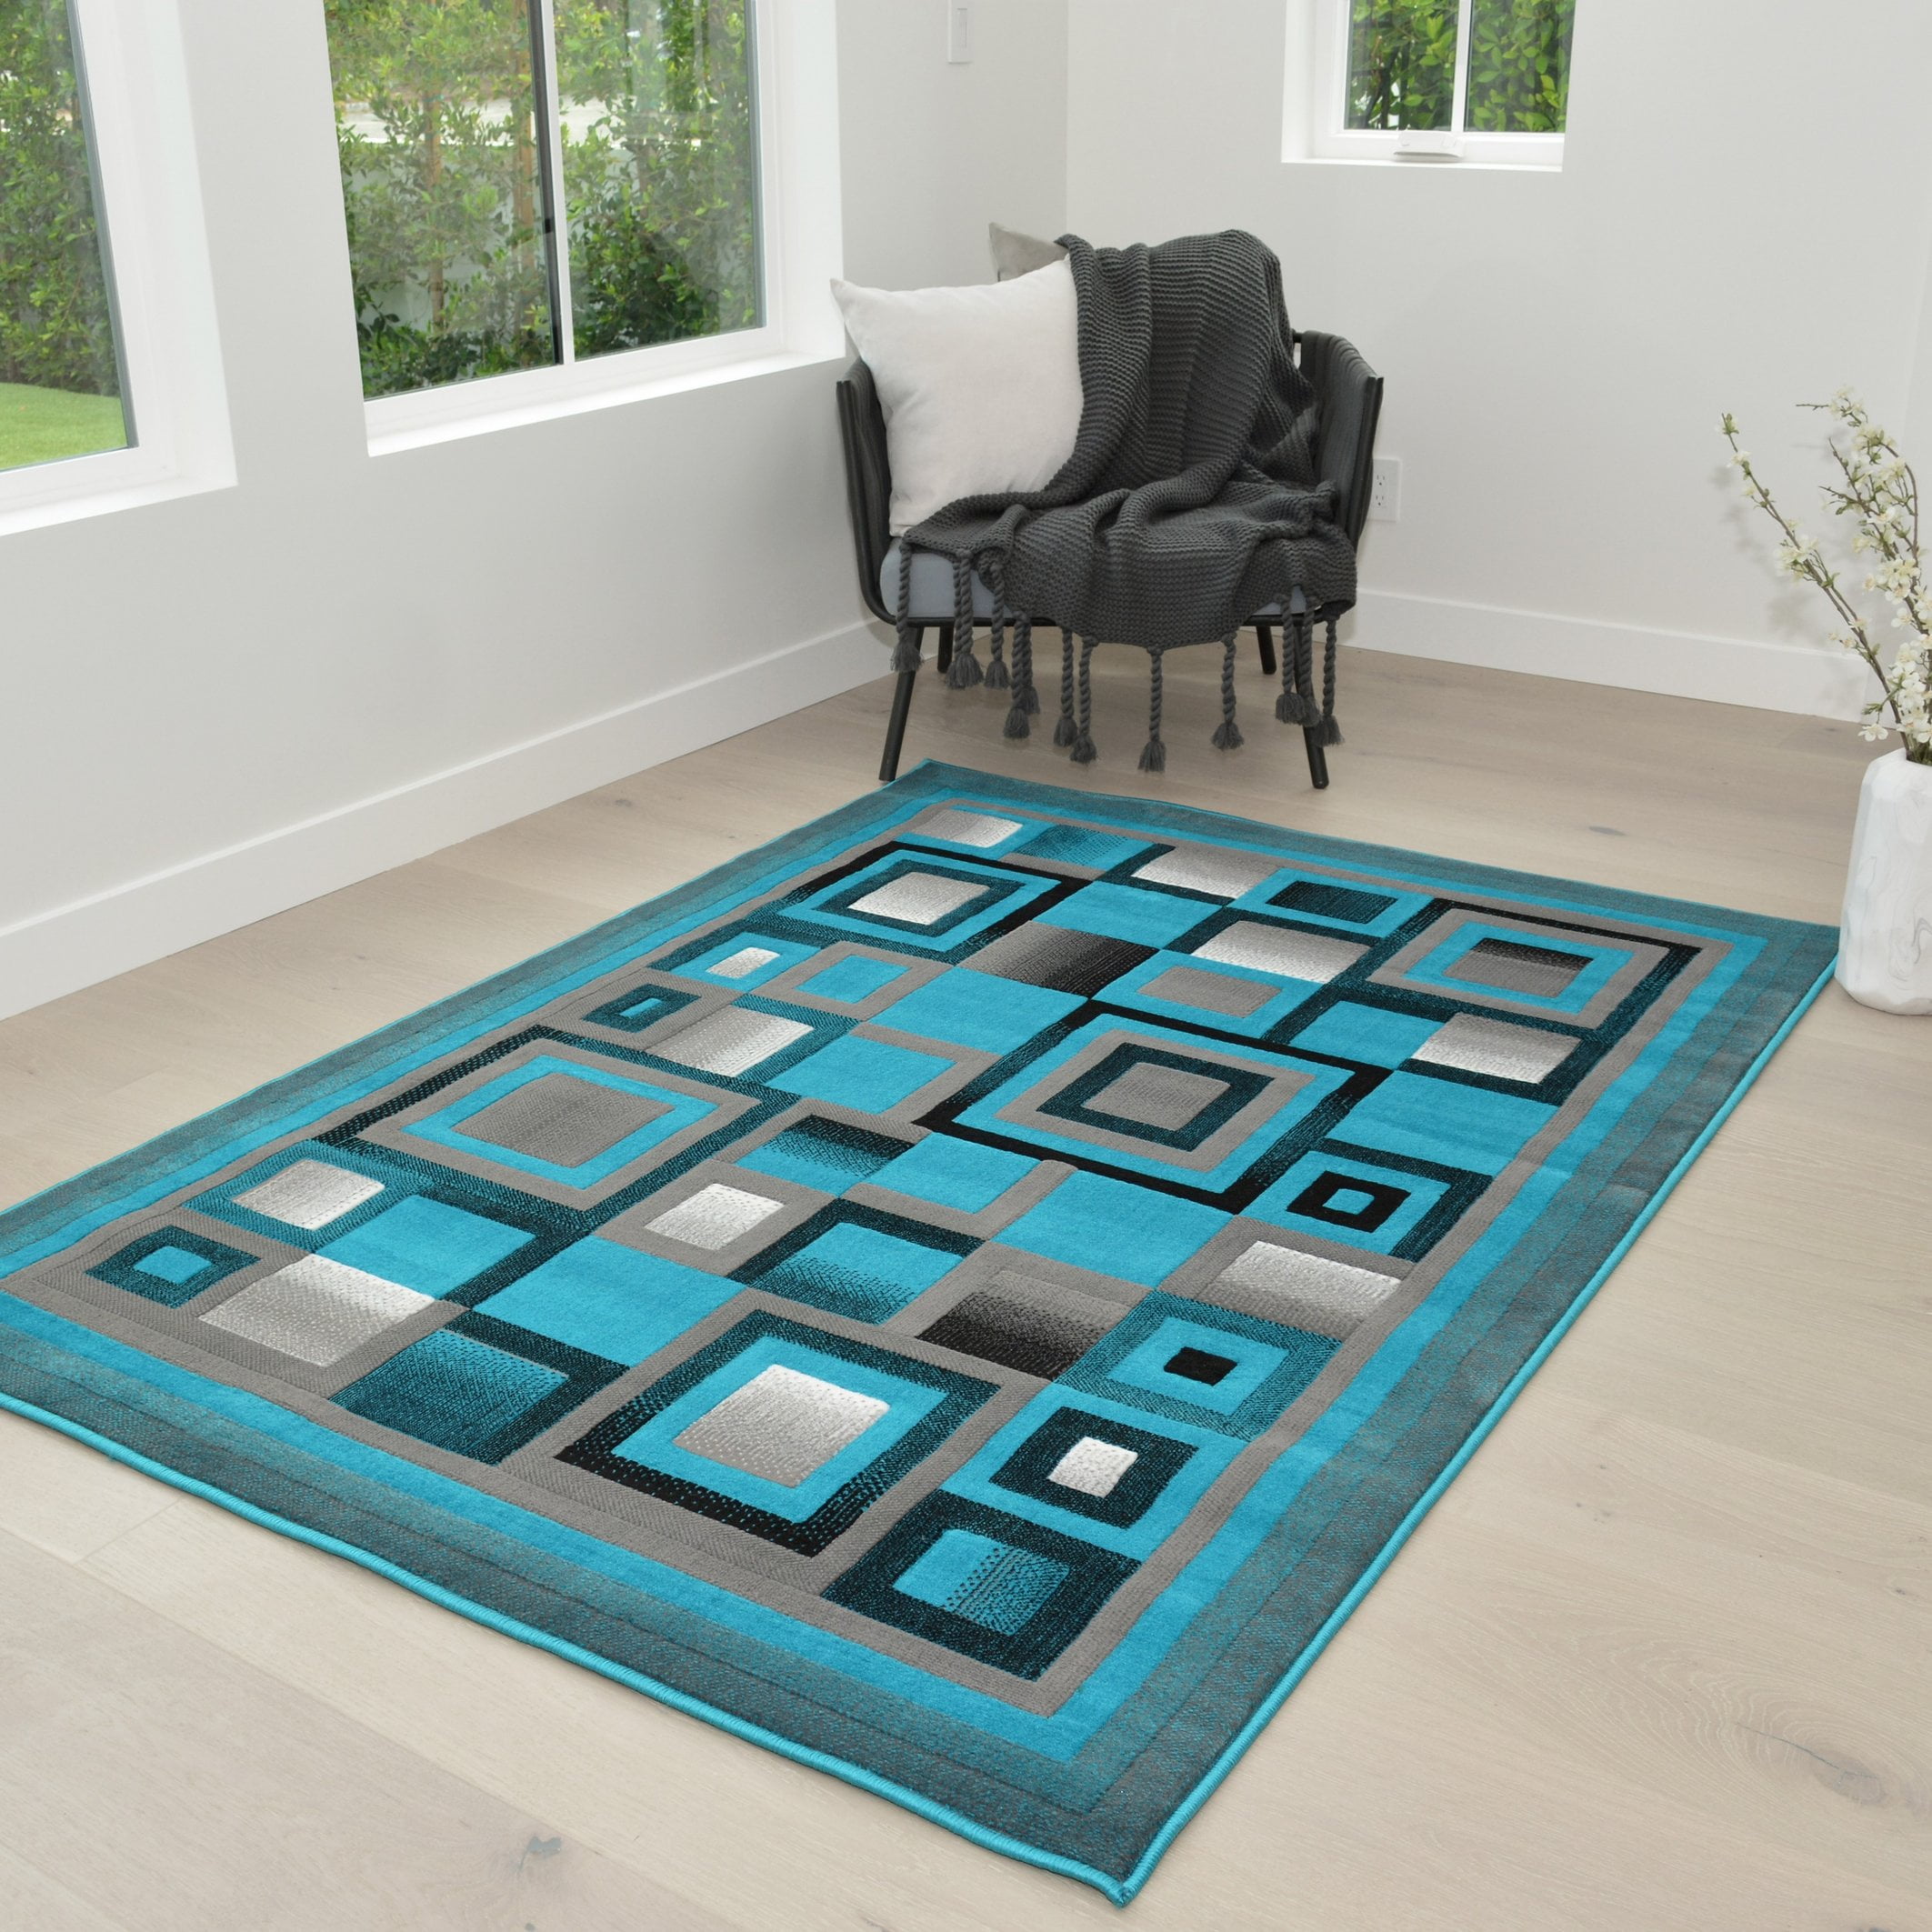 Hr Rugs Turquoise Gray And Black, Area Rugs Turquoise